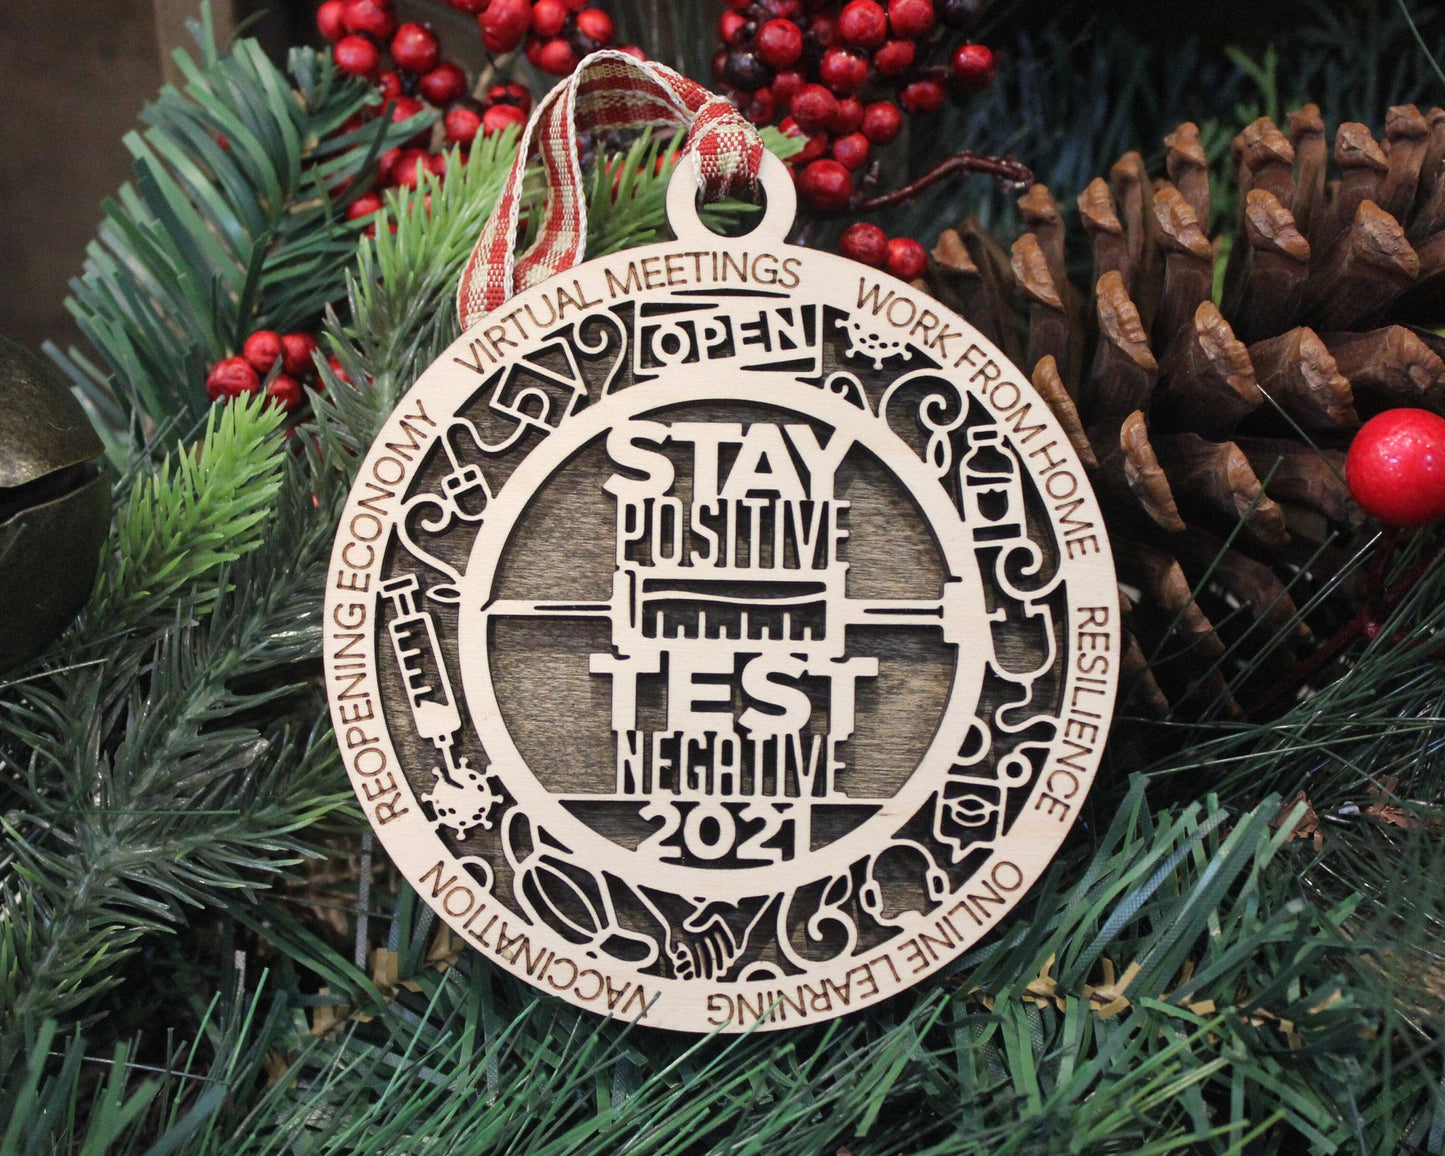 Stay Positive - Wood Ornament #W146